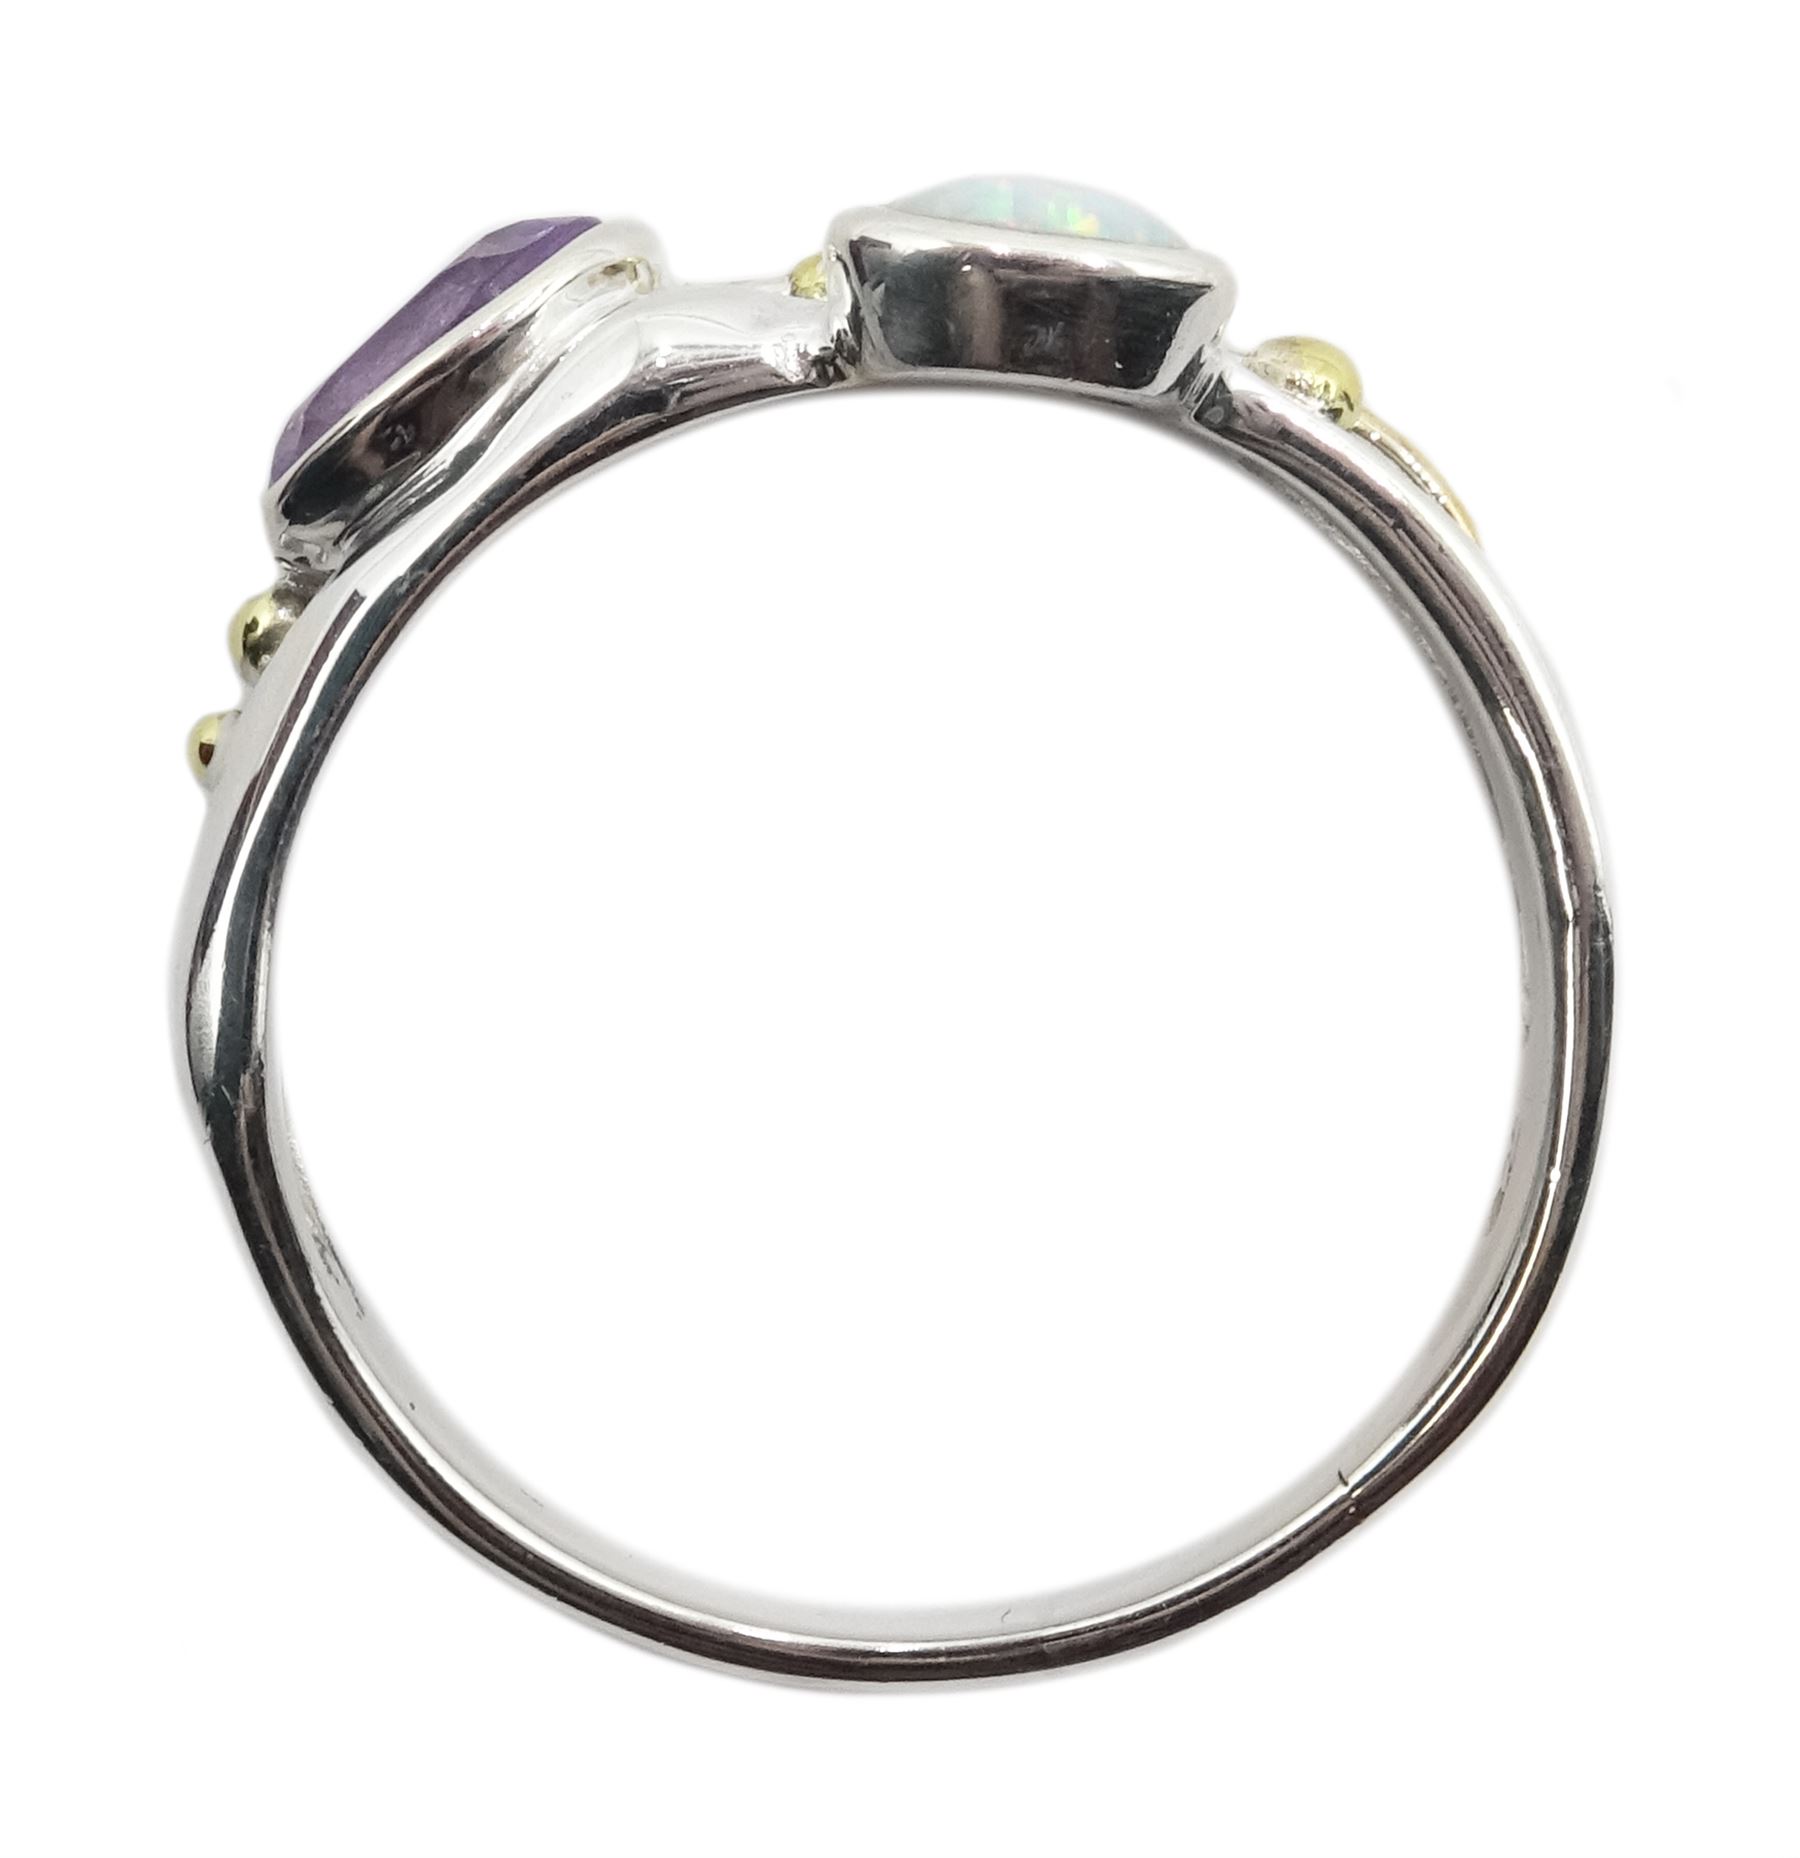 Silver and 14ct gold wire amethyst and opal ring - Image 5 of 7